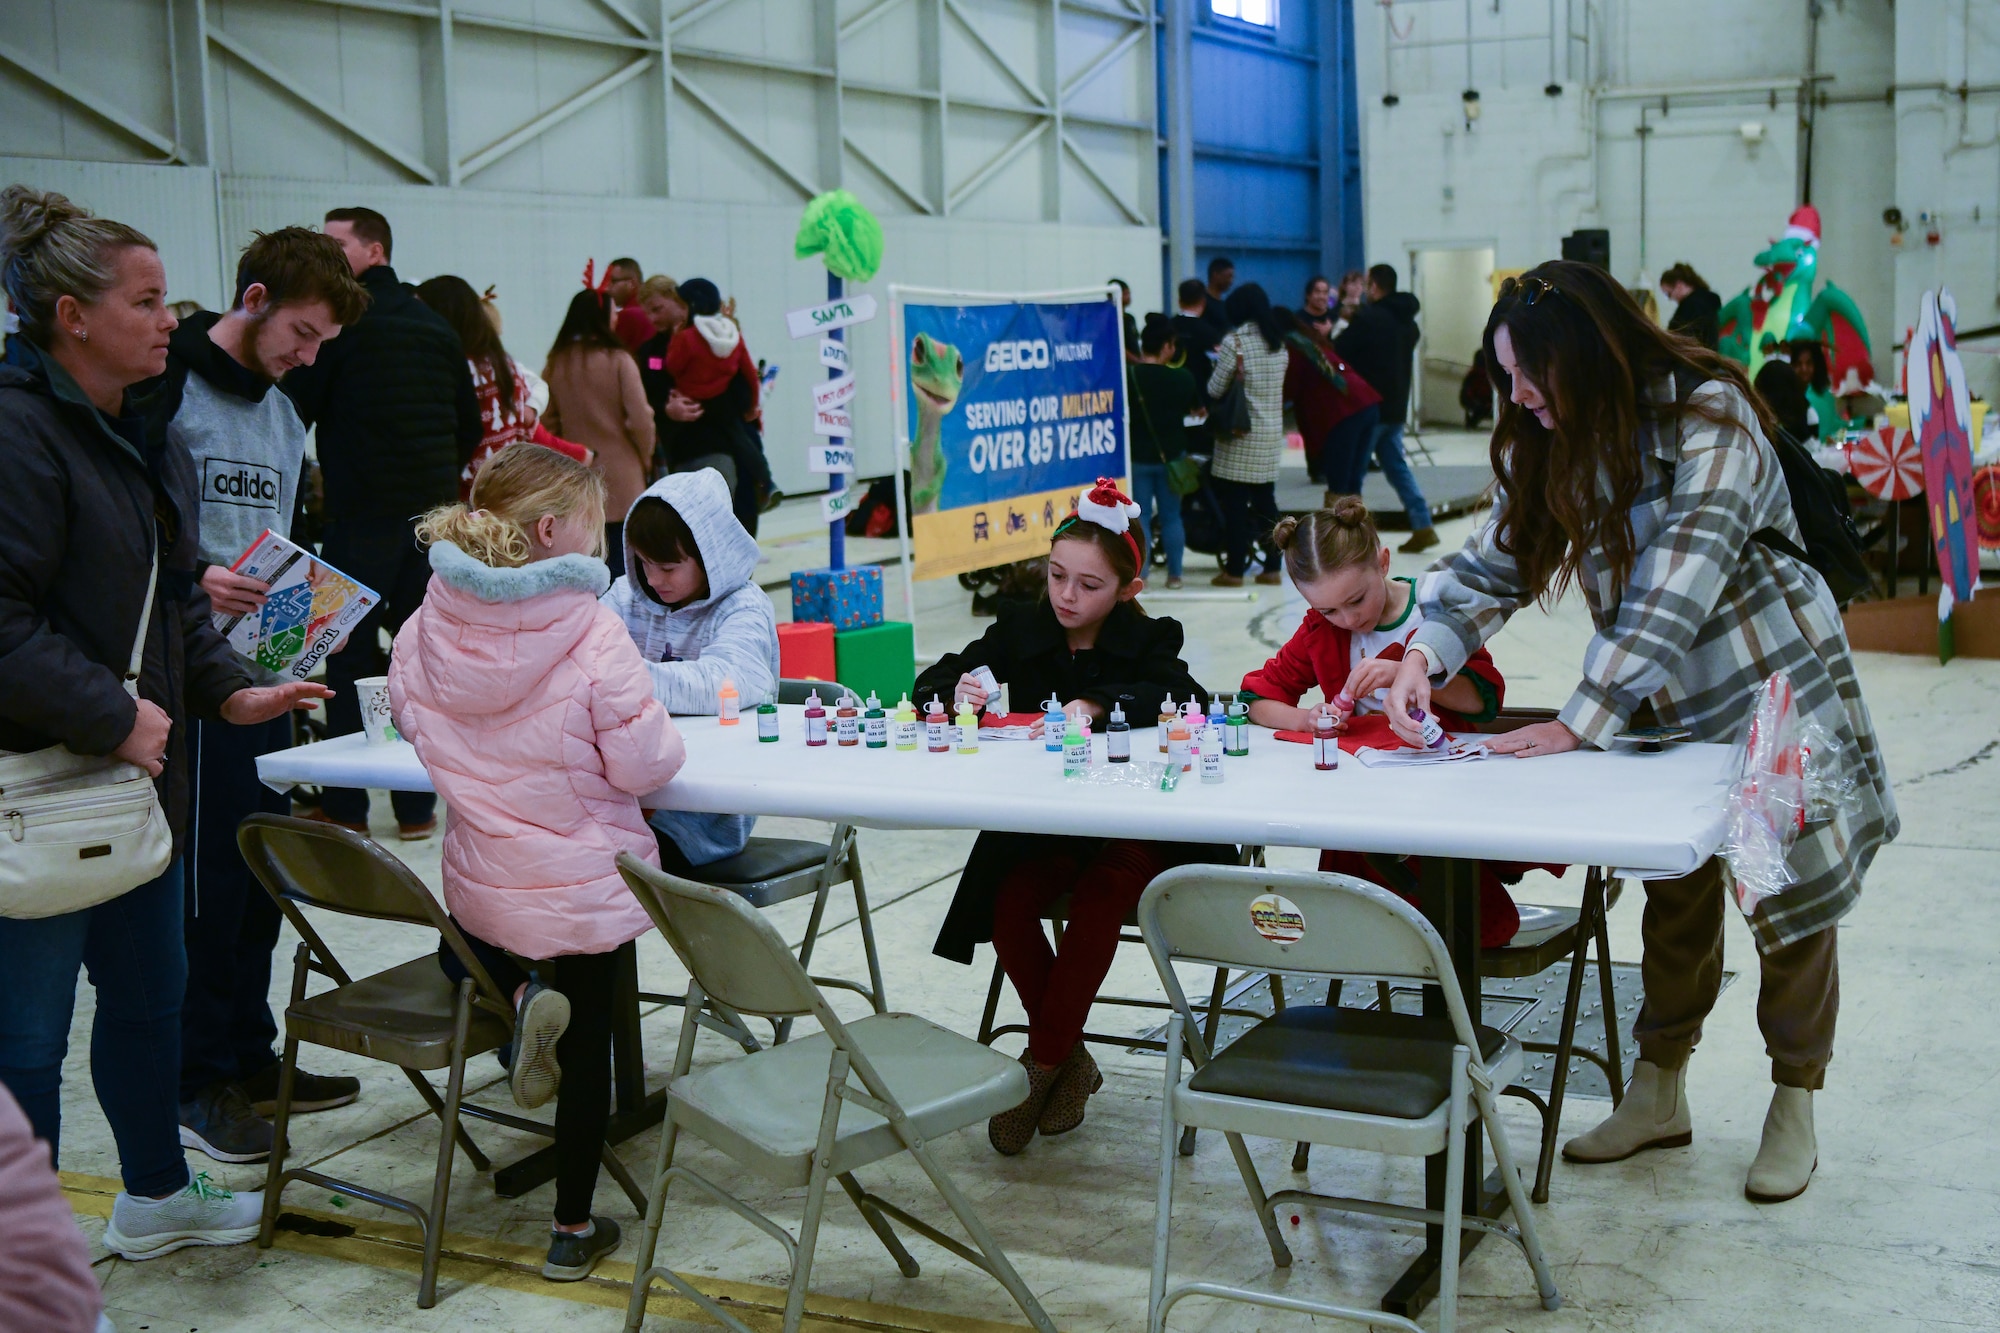 Children decorate stockings at the Winterfest on the flightline on Beale Air Force Base, Calif. on Dec. 17, 2022.